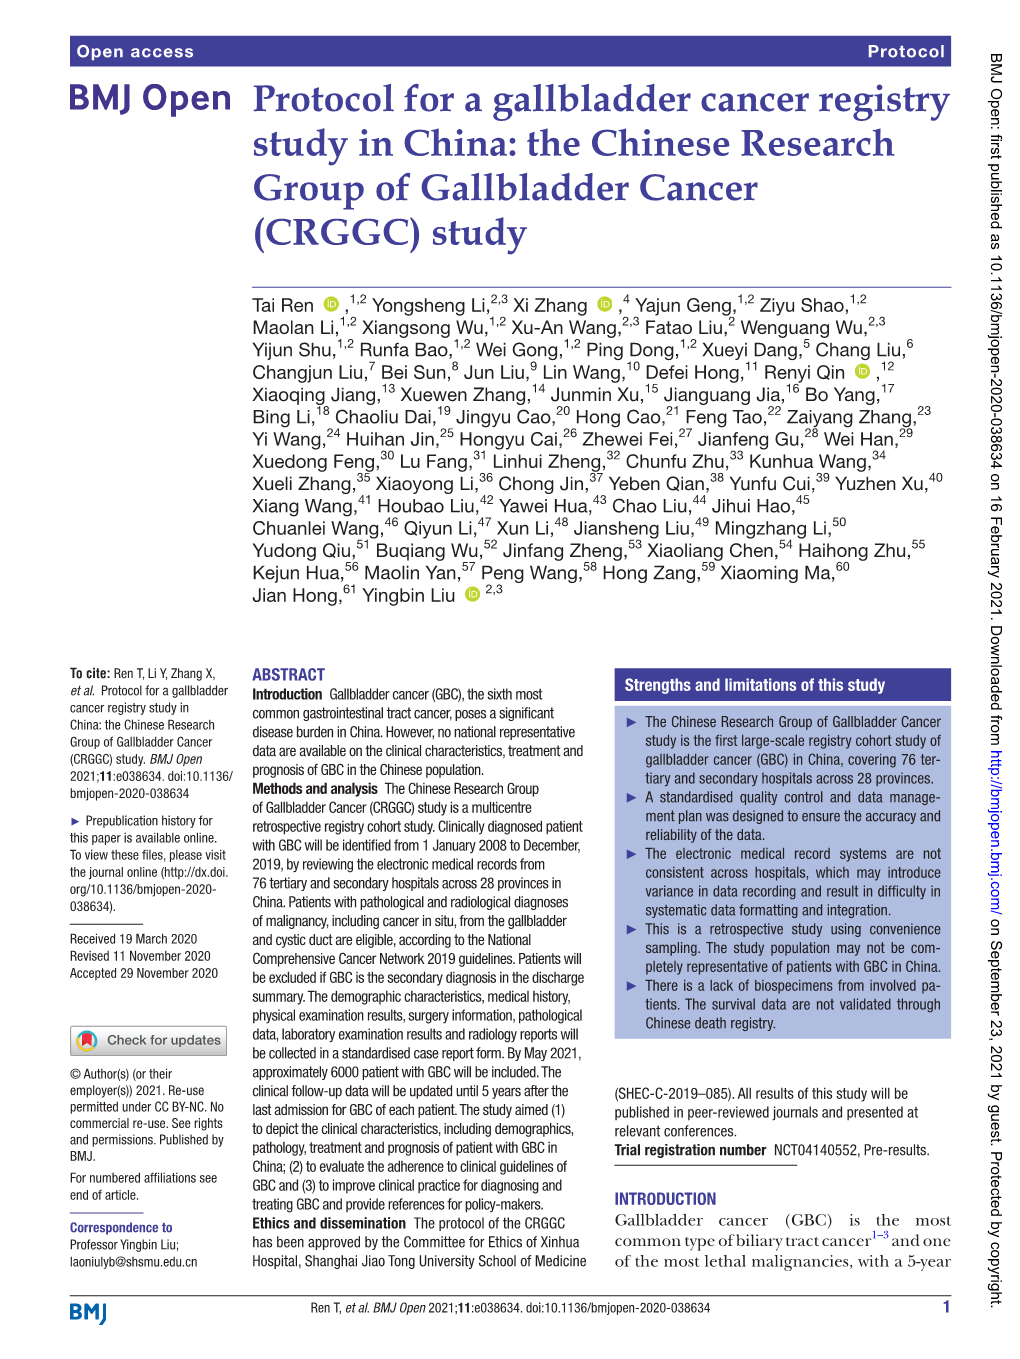 Protocol for a Gallbladder Cancer Registry Study in China: the Chinese Research Group of Gallbladder Cancer (CRGGC) Study